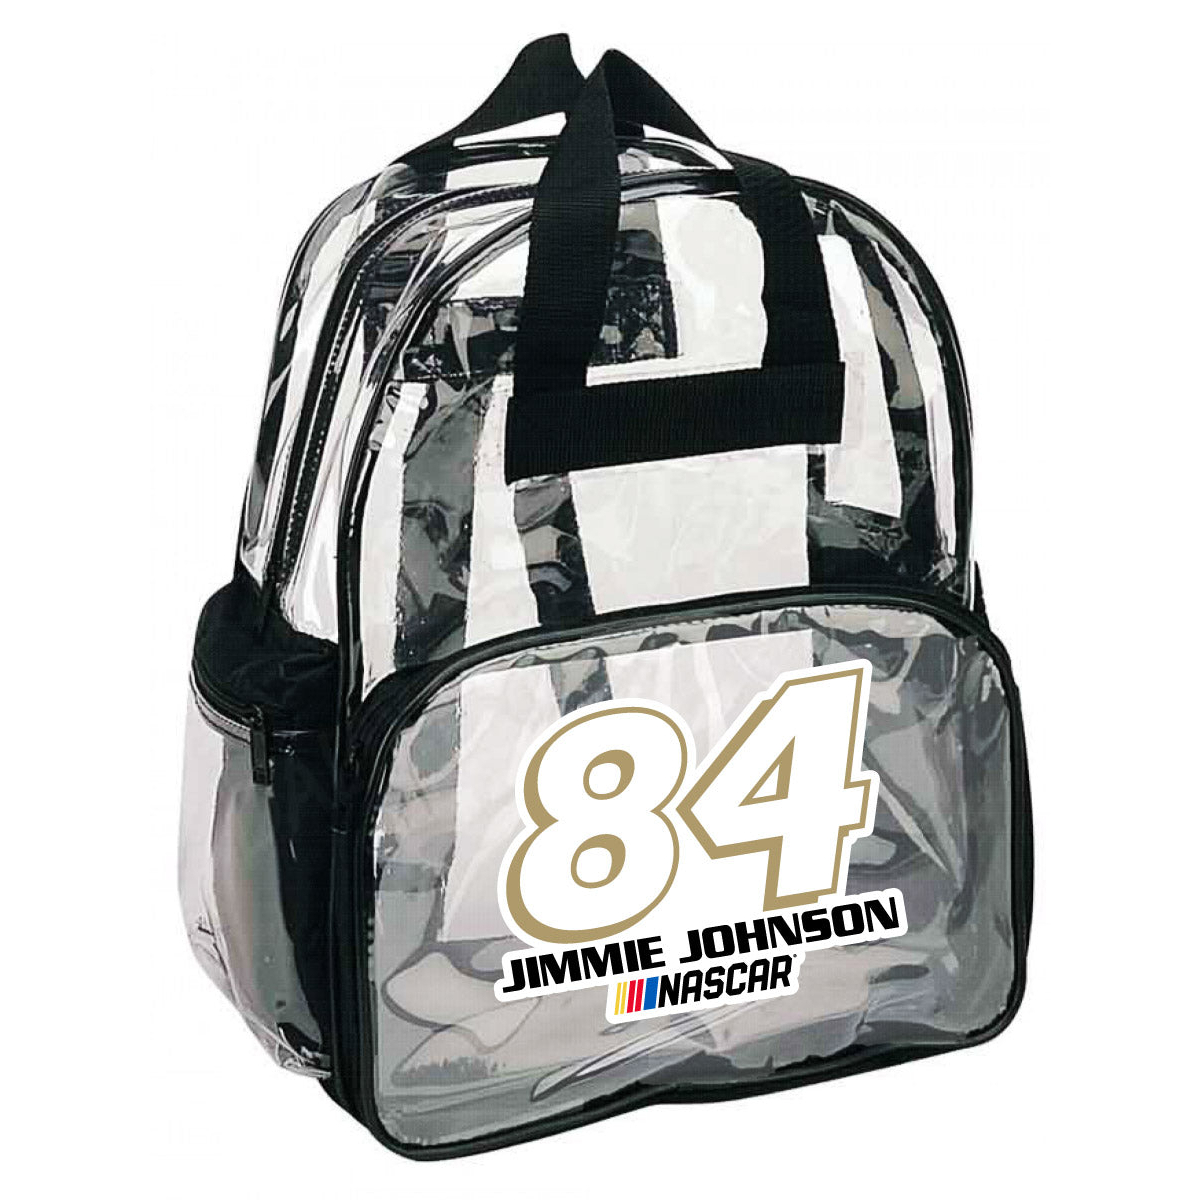 NASCAR Jimmie Johnson Clear View Backpack